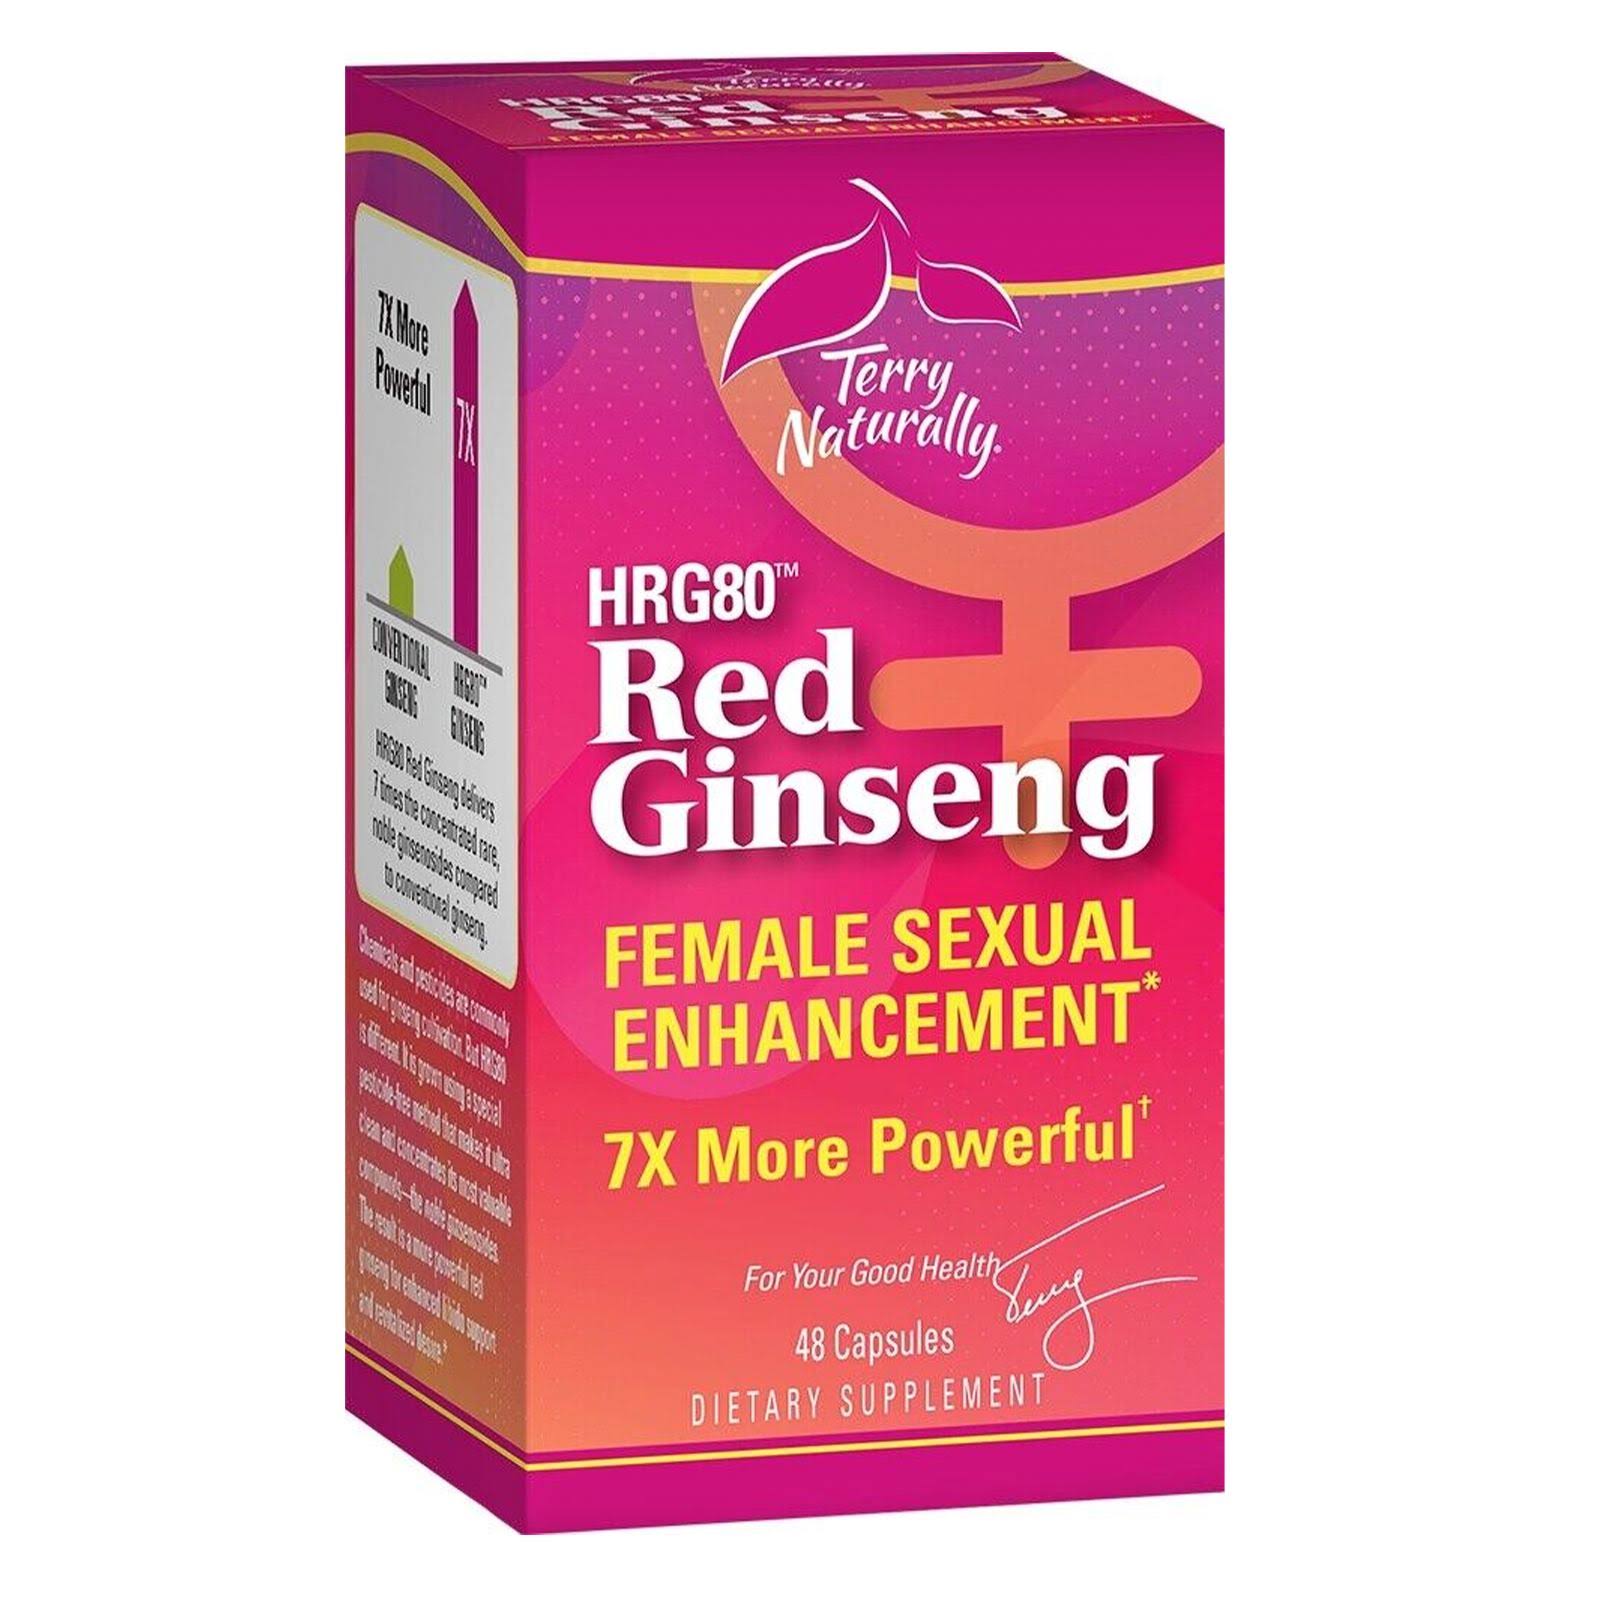 Terry Naturally HRG80 Red Ginseng Female Sexual Enhancement 48 Caps